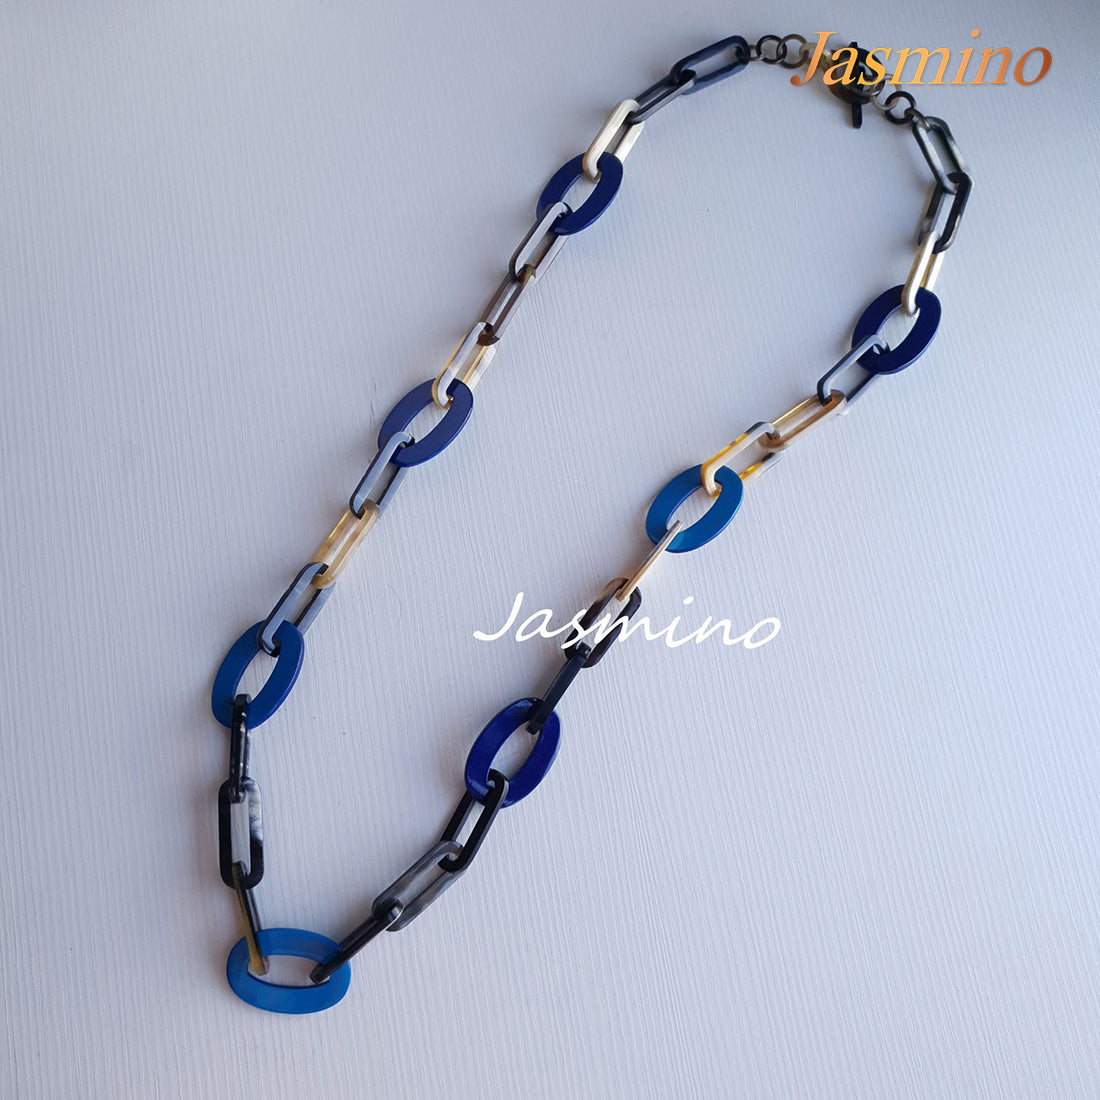 The necklace has several large sky blue and classic blue pieces in natural light, impressive gift for her